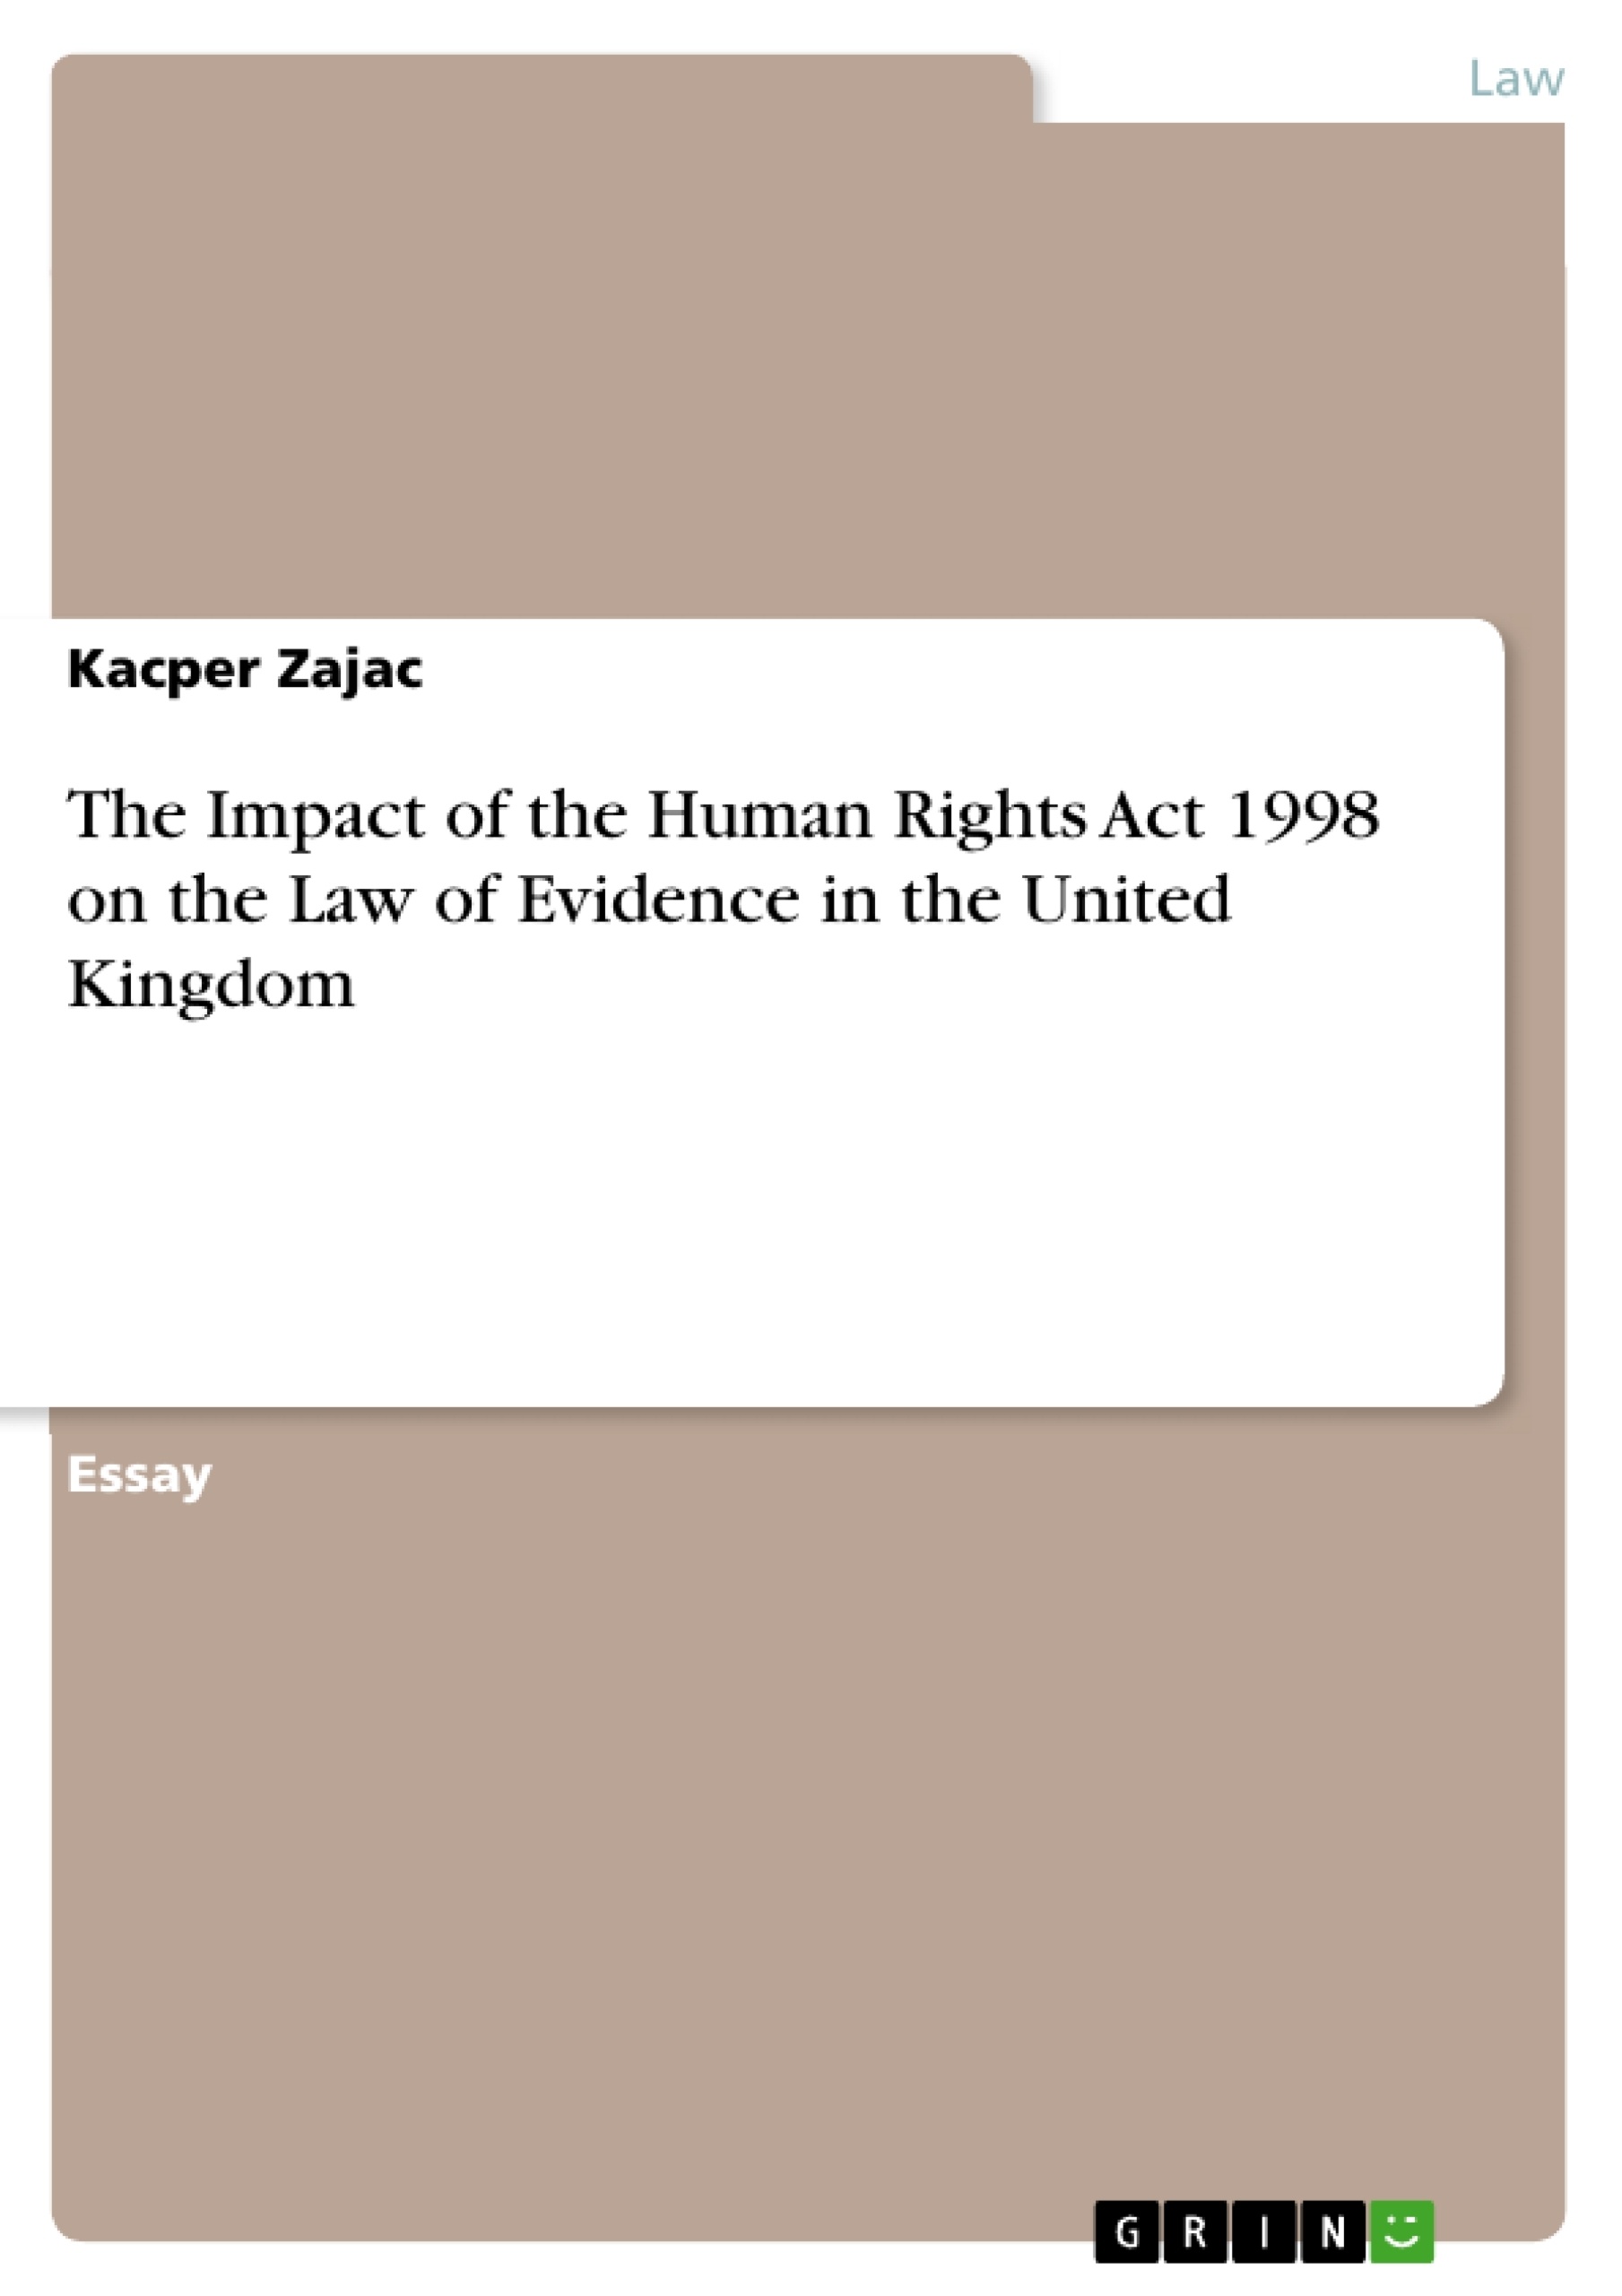 Title: The Impact of the Human Rights Act 1998 on the Law of Evidence in the United Kingdom